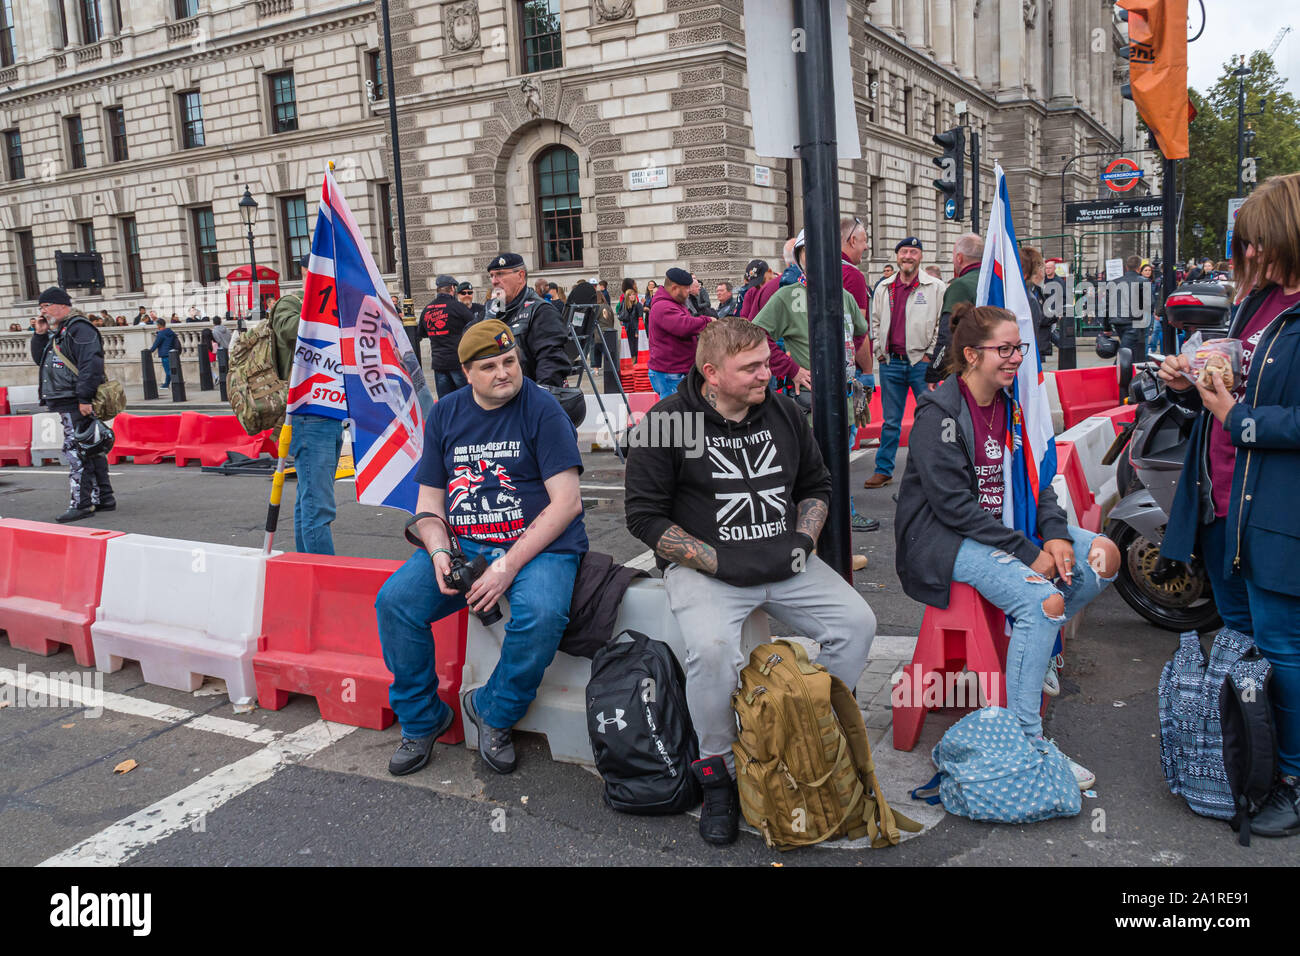 London, UK. 28th Sep, 2019. Hundreds had come to march in Operation Zulu, the protest against the prosecution of 'Soldier F' for the murder of civil rights protesters in Londonderry on 'Bloody Sunday' in 1972. Parliament Square was ringed with motor bikes as a part of the event which was called Operation Rolling Thunder. A small group stood on an armoured car to 'moon' at Parliament. Credit: Peter Marshall/Alamy Live News Stock Photo